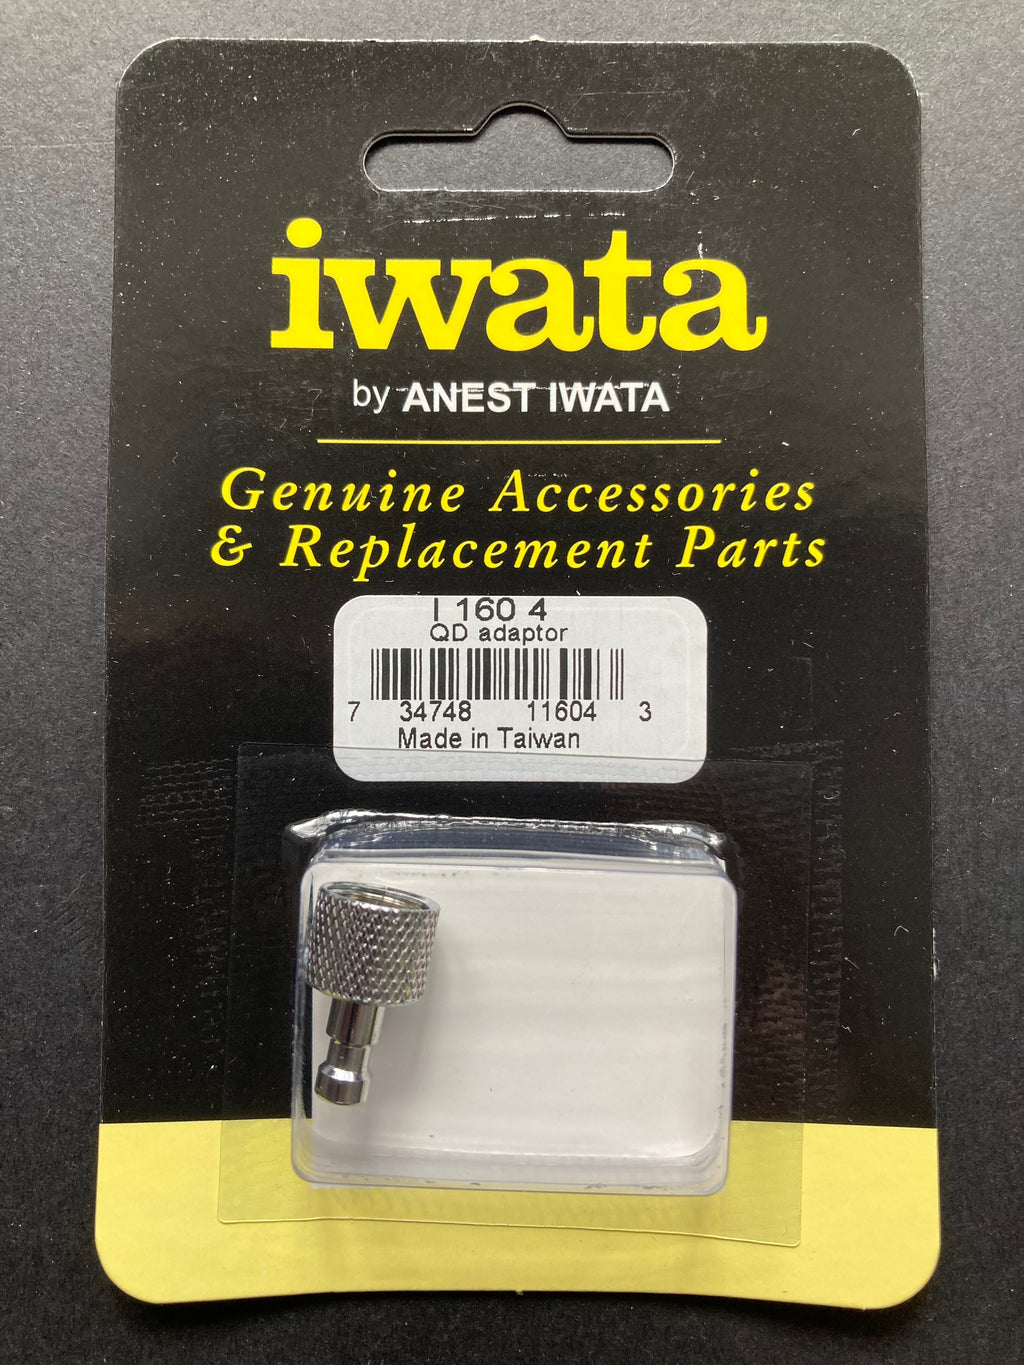 Iwata Airbrush Quick Disconnect Male Adaptor, Part I1604